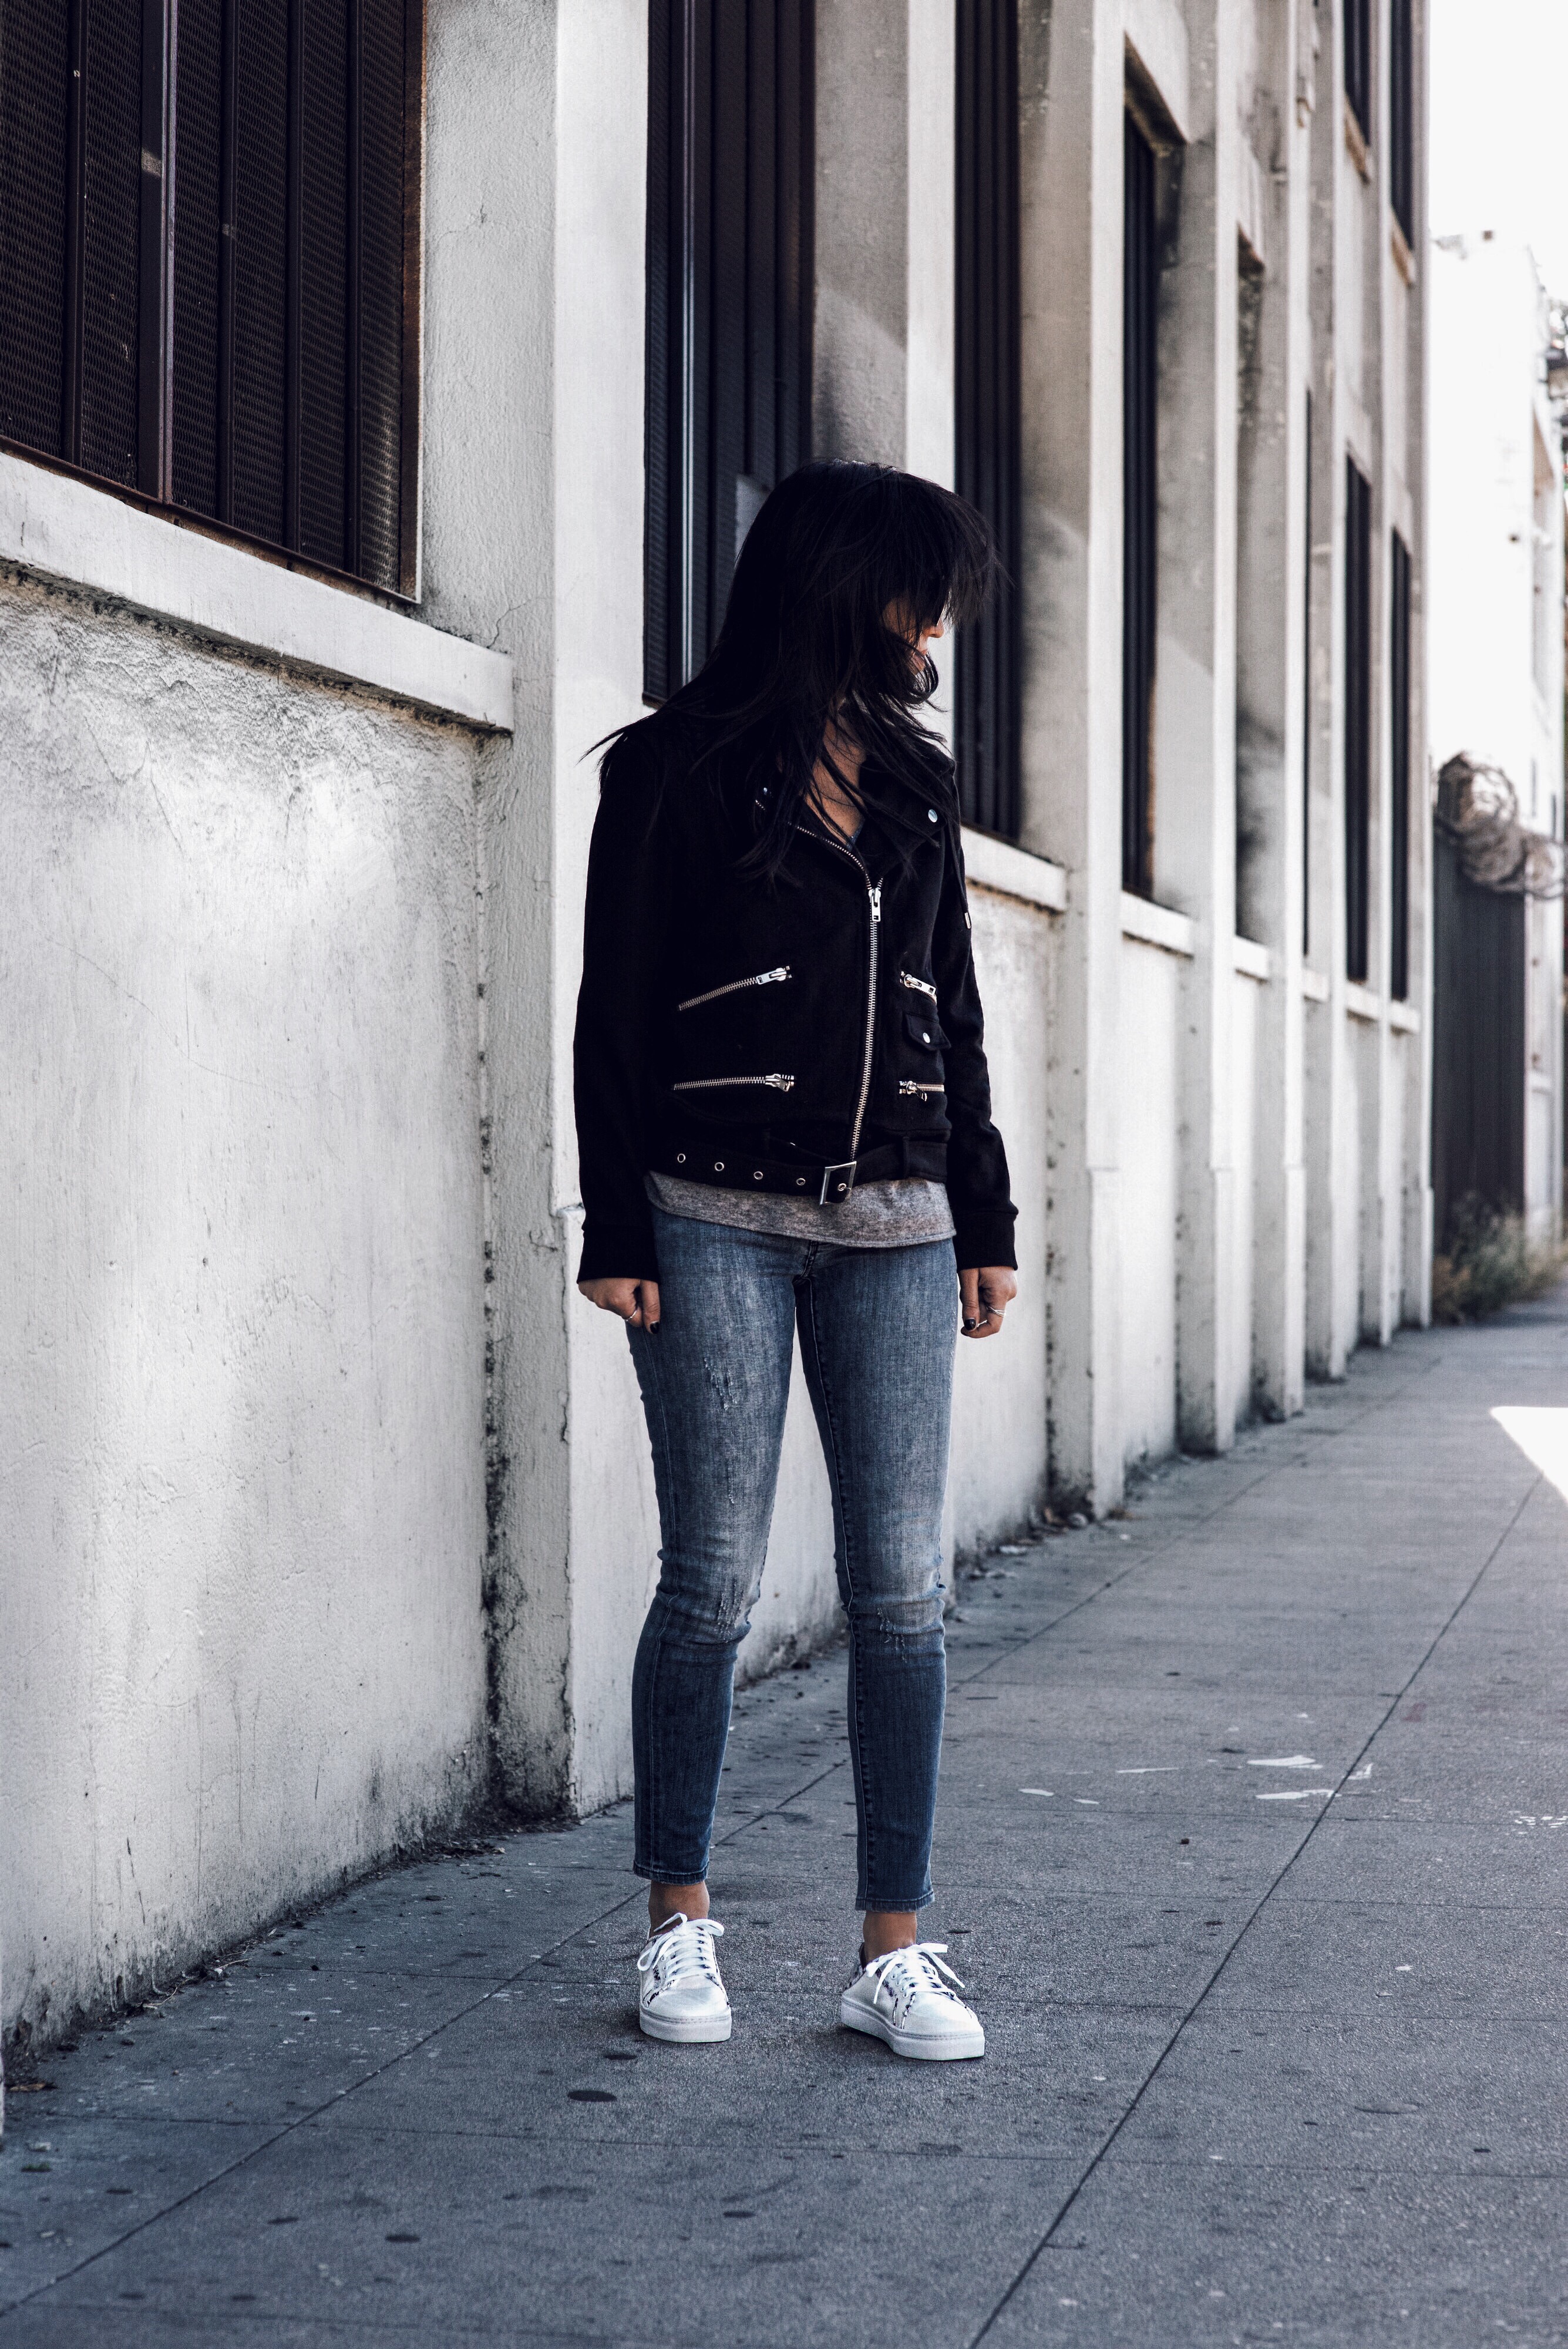 LA blogger Tania Sarin wearing the kooples jacket and sneakers